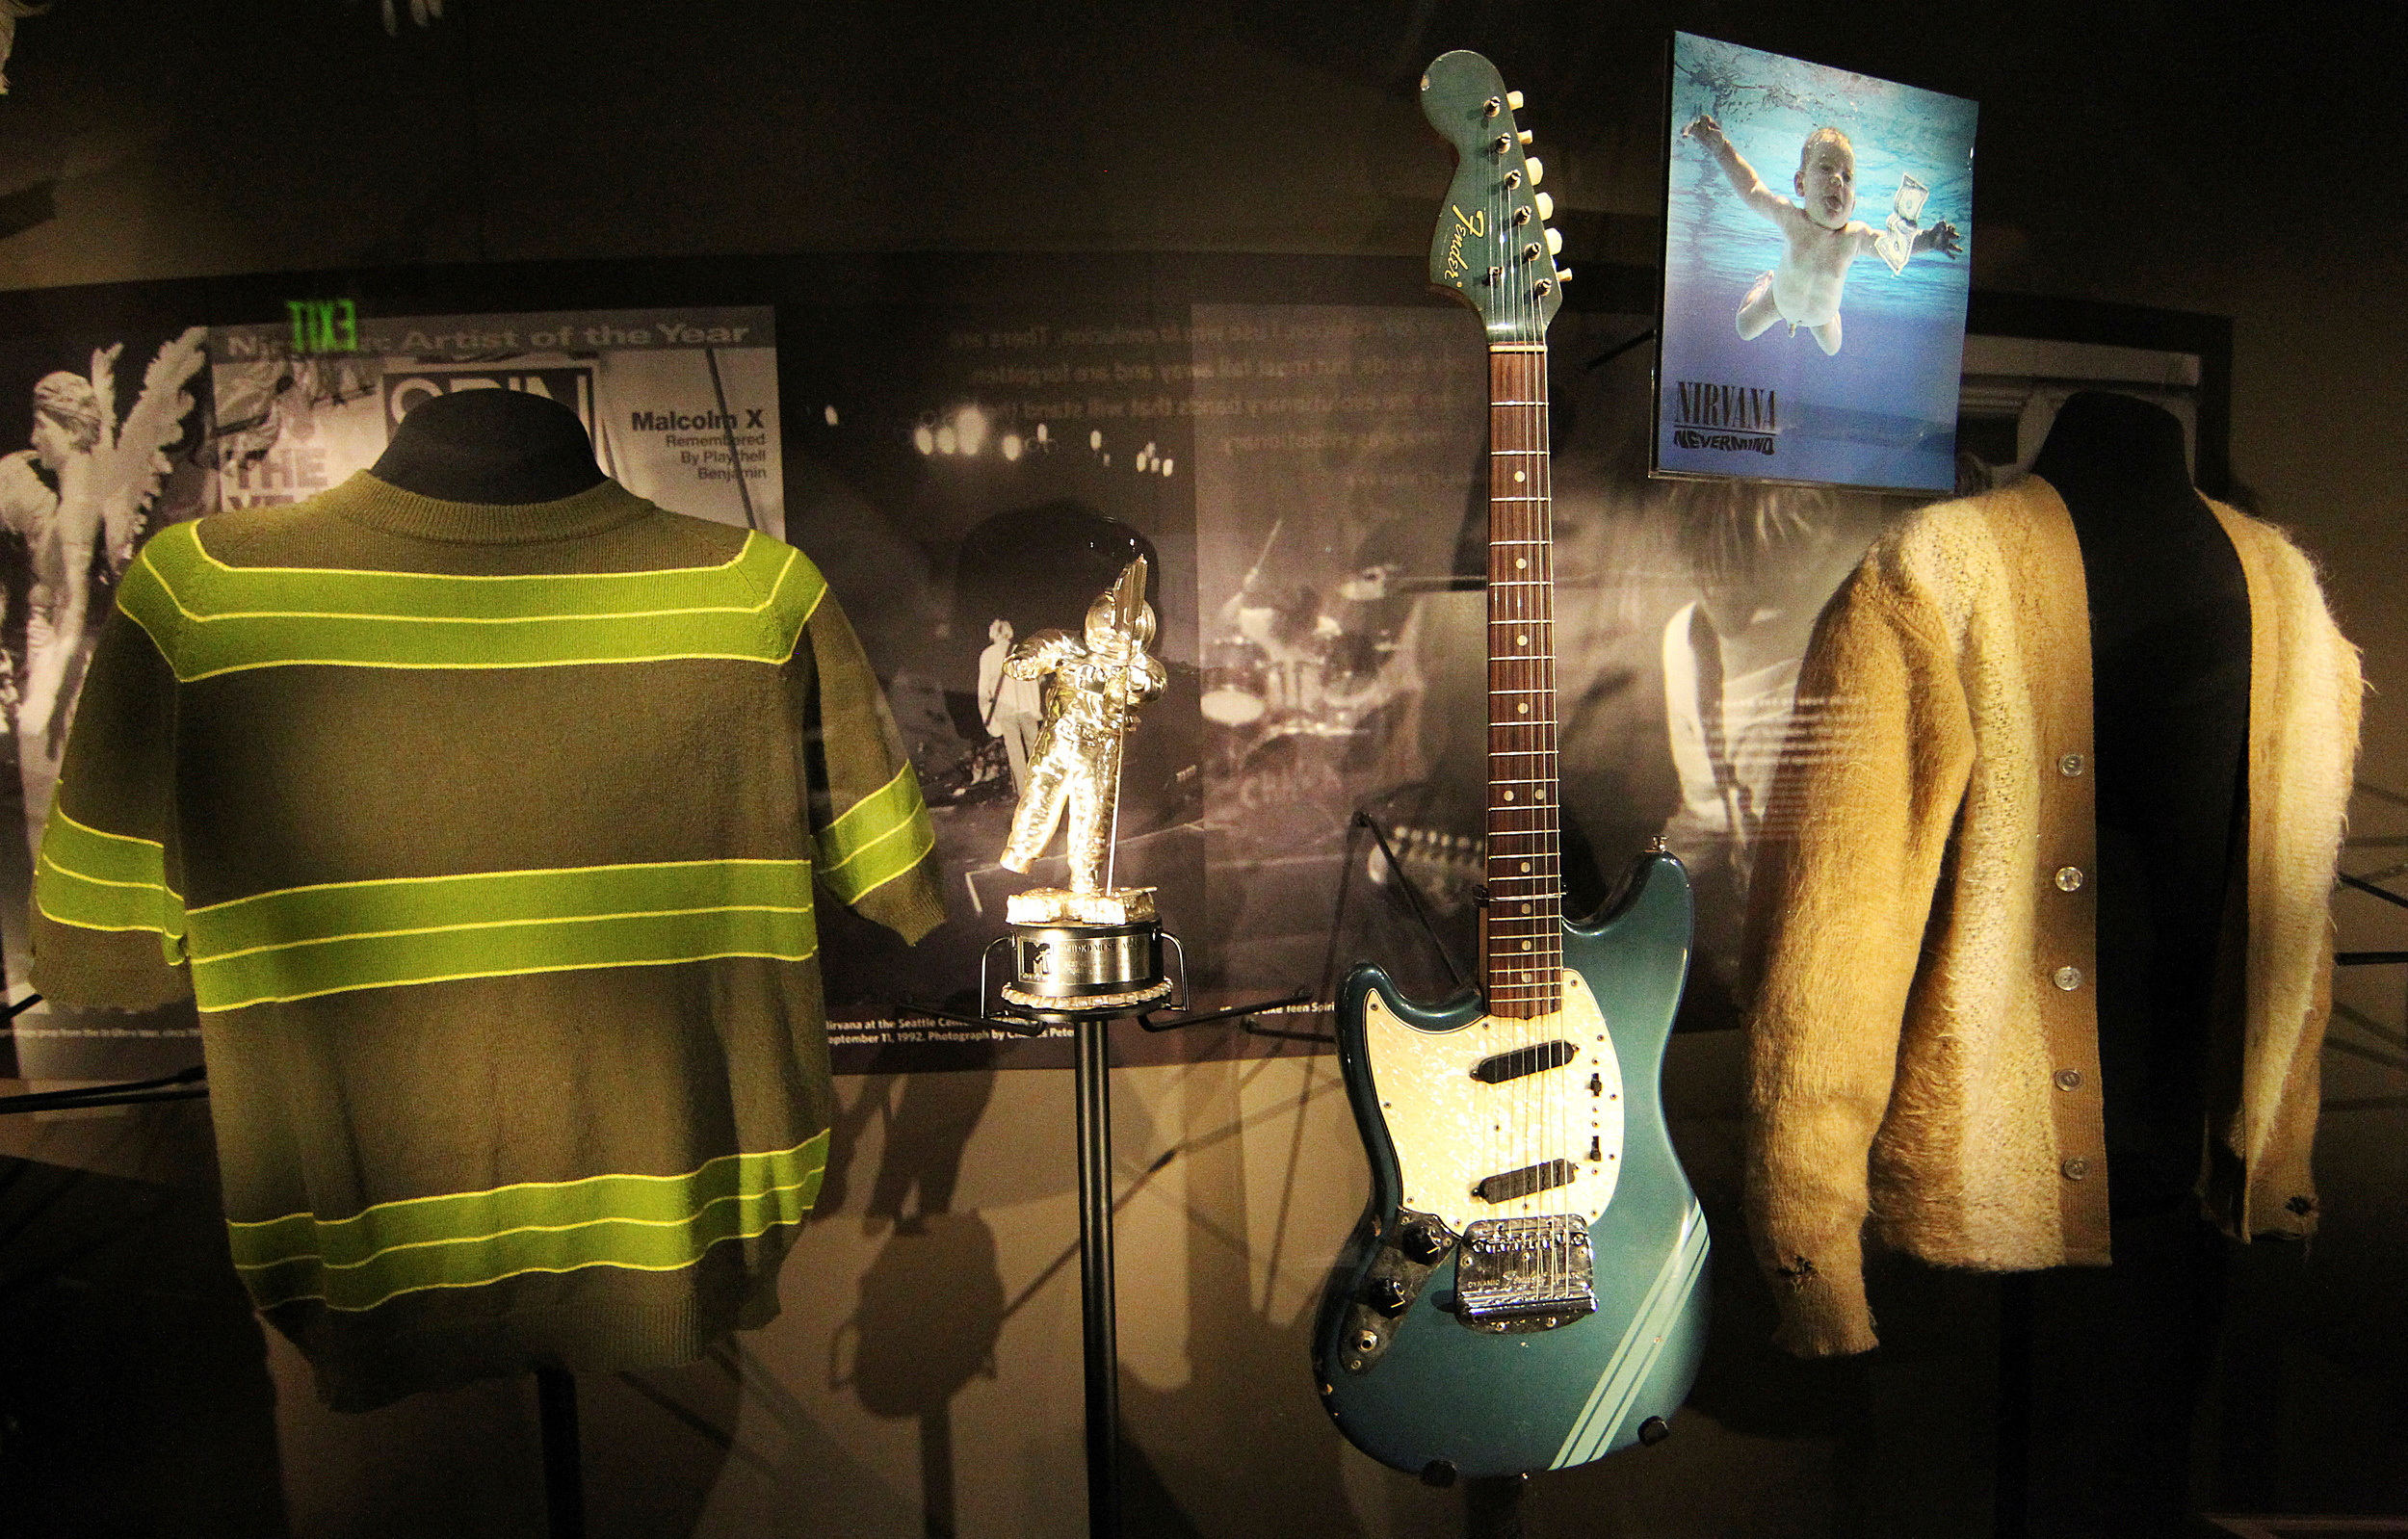 Iconic and rare memorabilia of the late Kurt Cobain are on display at the 